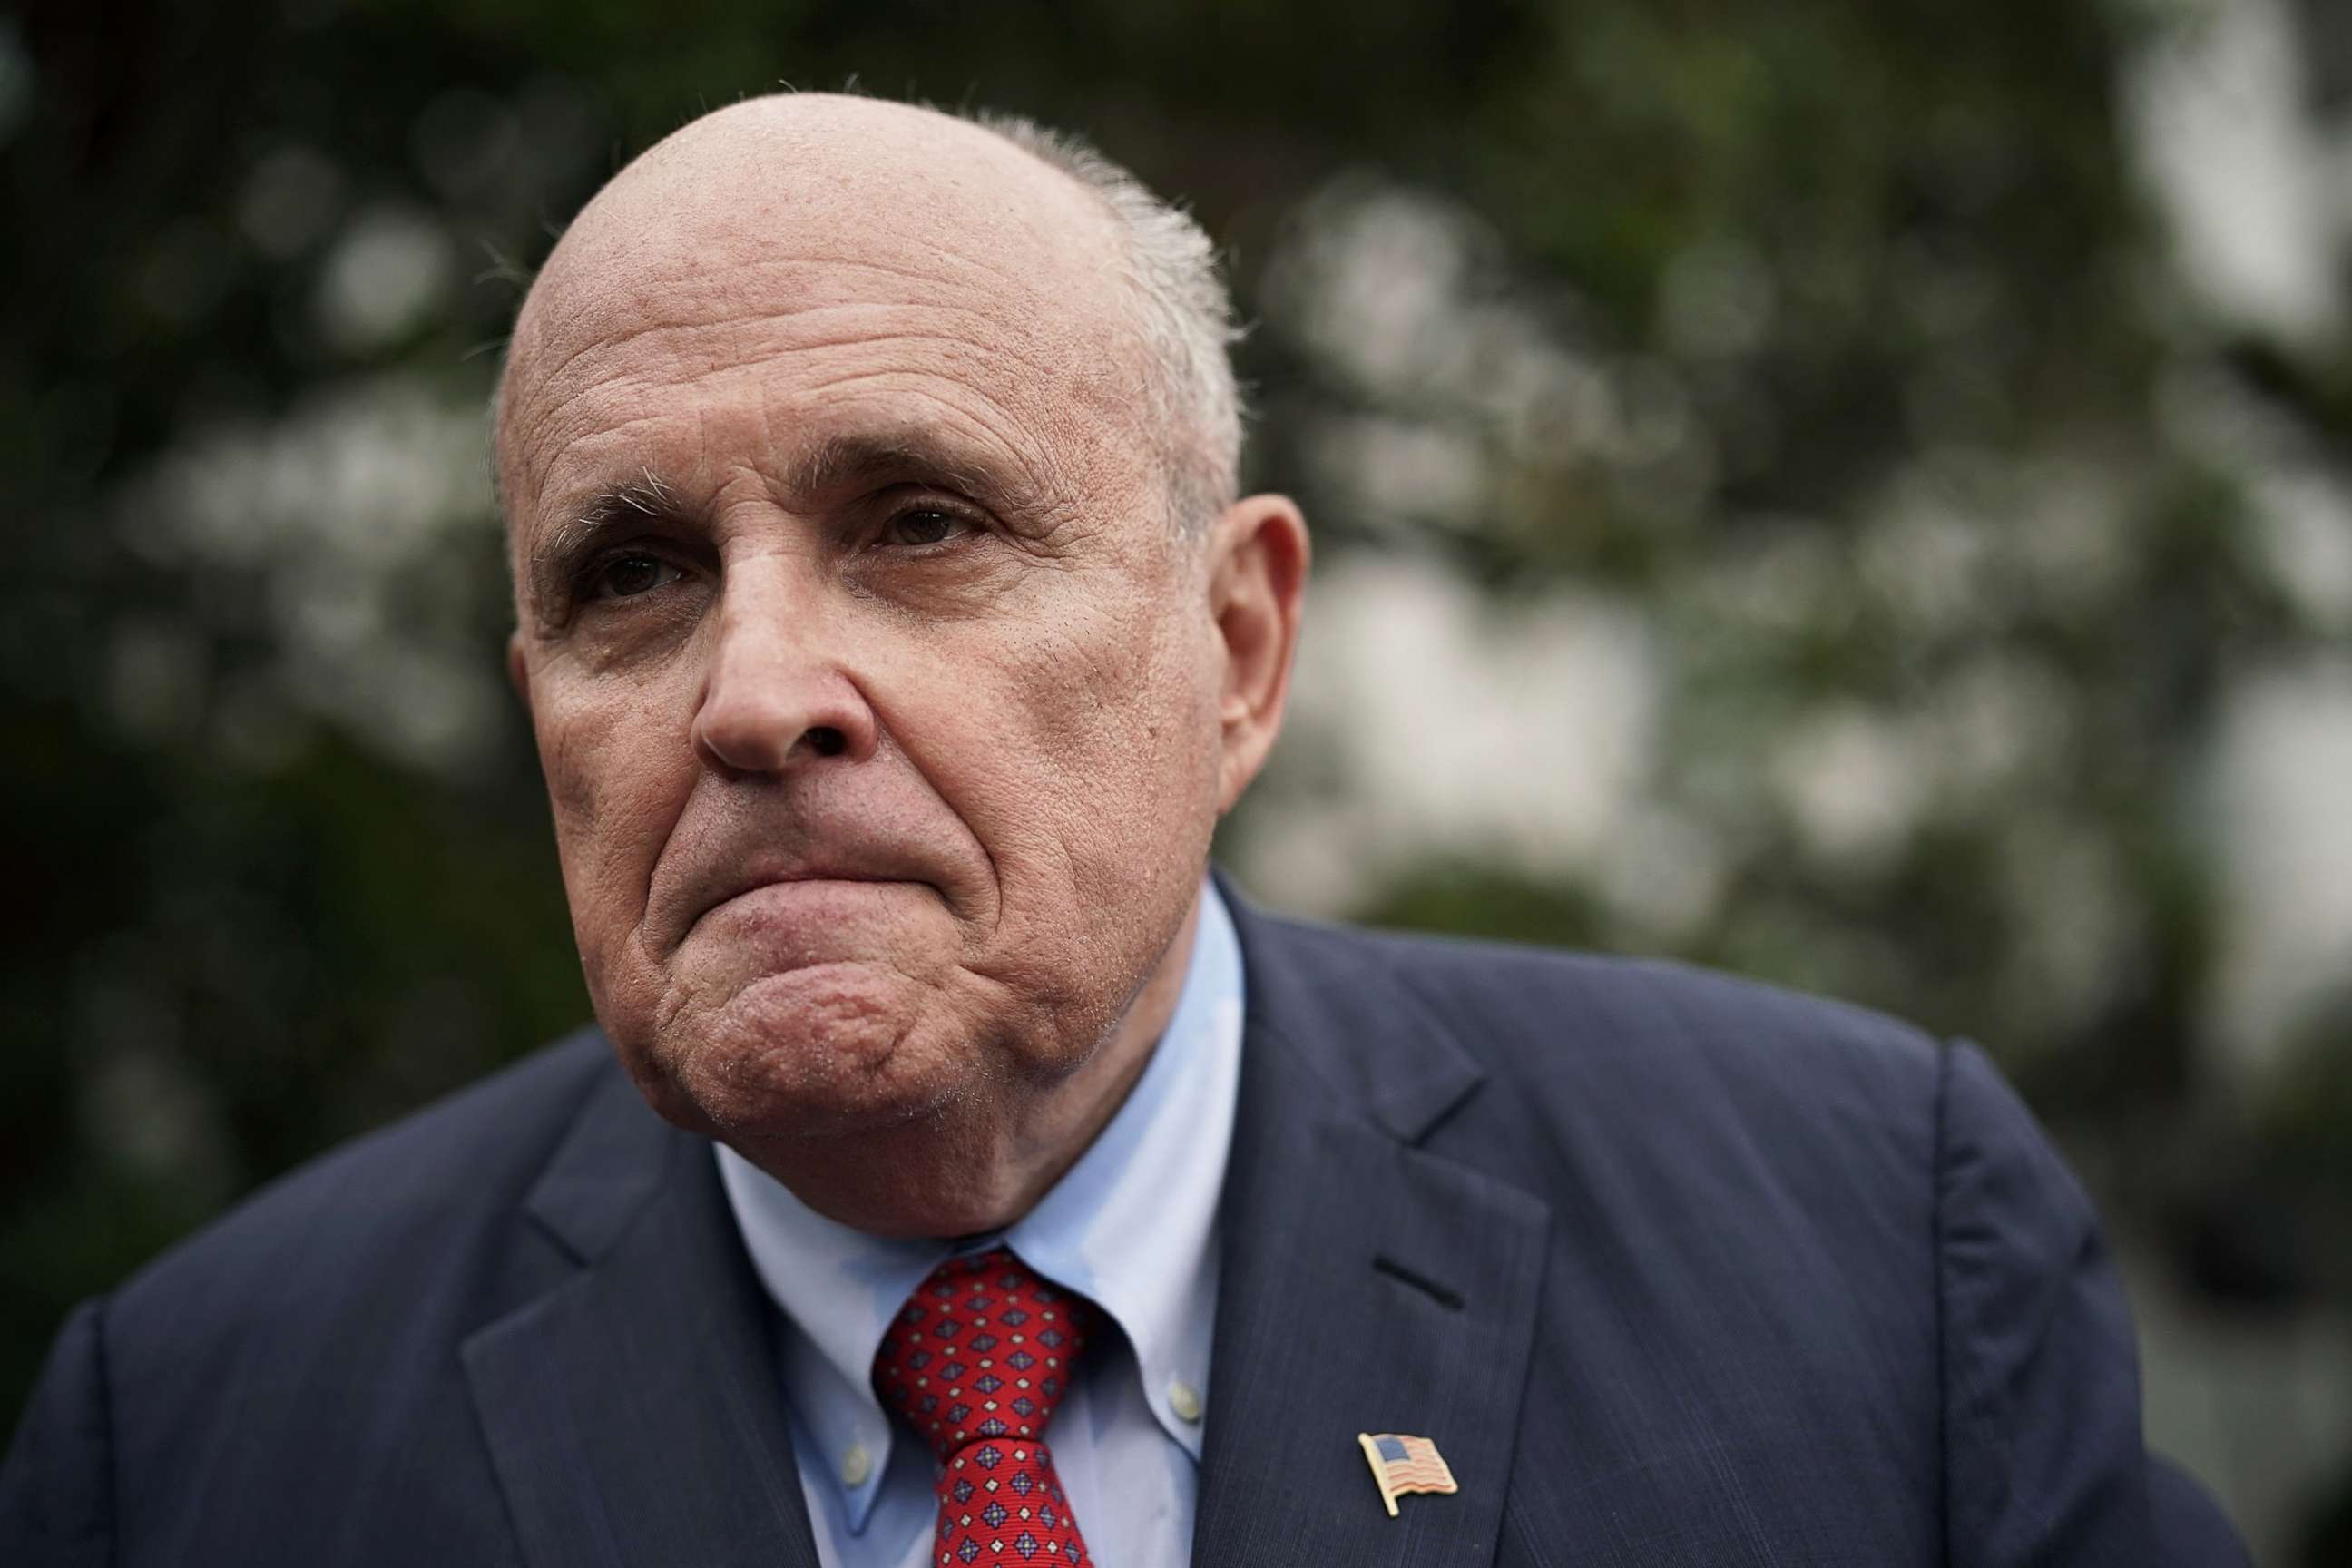 PHOTO: Rudy Giuliani, former New York City mayor and current lawyer for U.S. President Donald Trump, speaks to members of the media at the White House, May 30, 2018, in Washington.